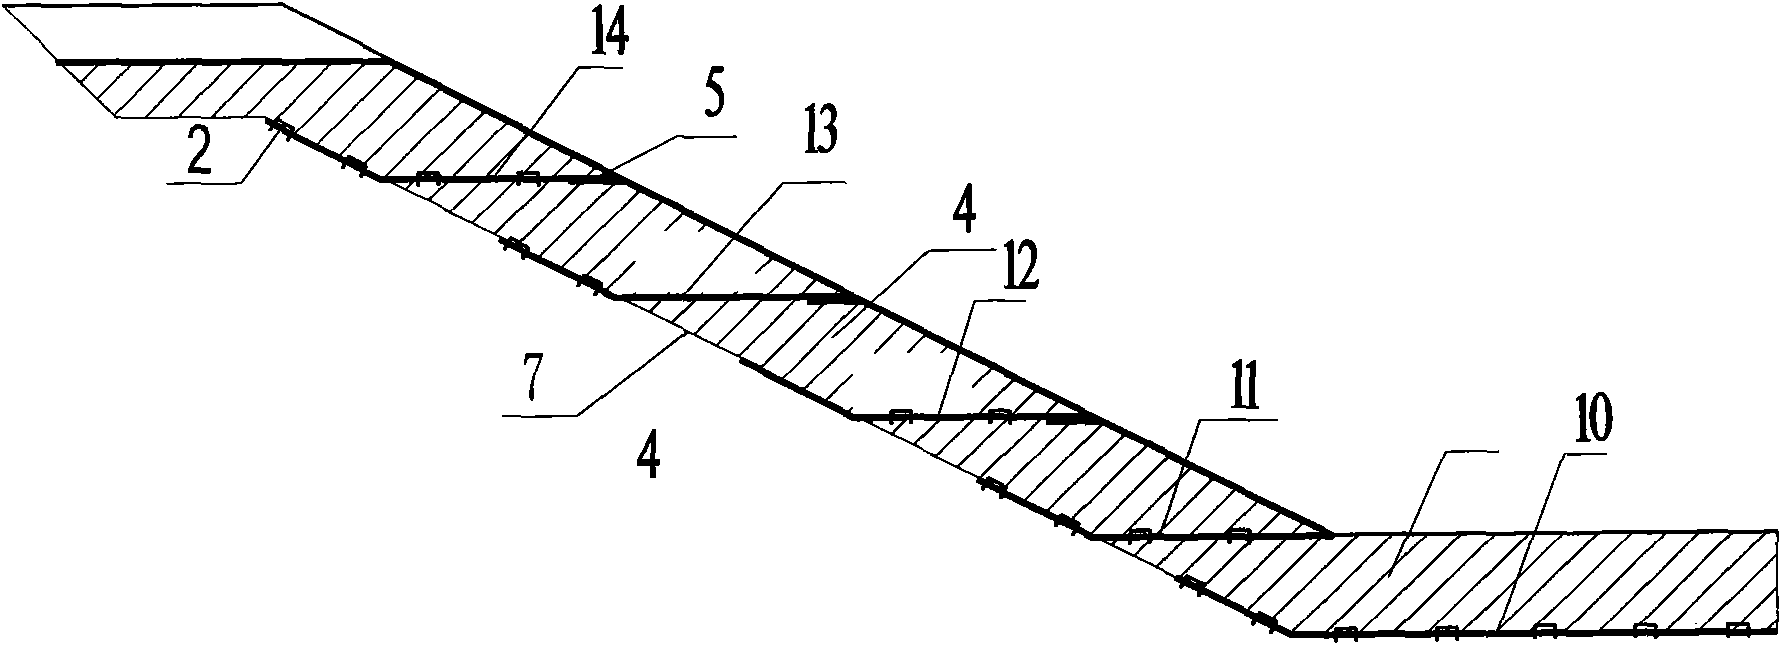 Method for treating expansive soil channel side slopes with geogrid